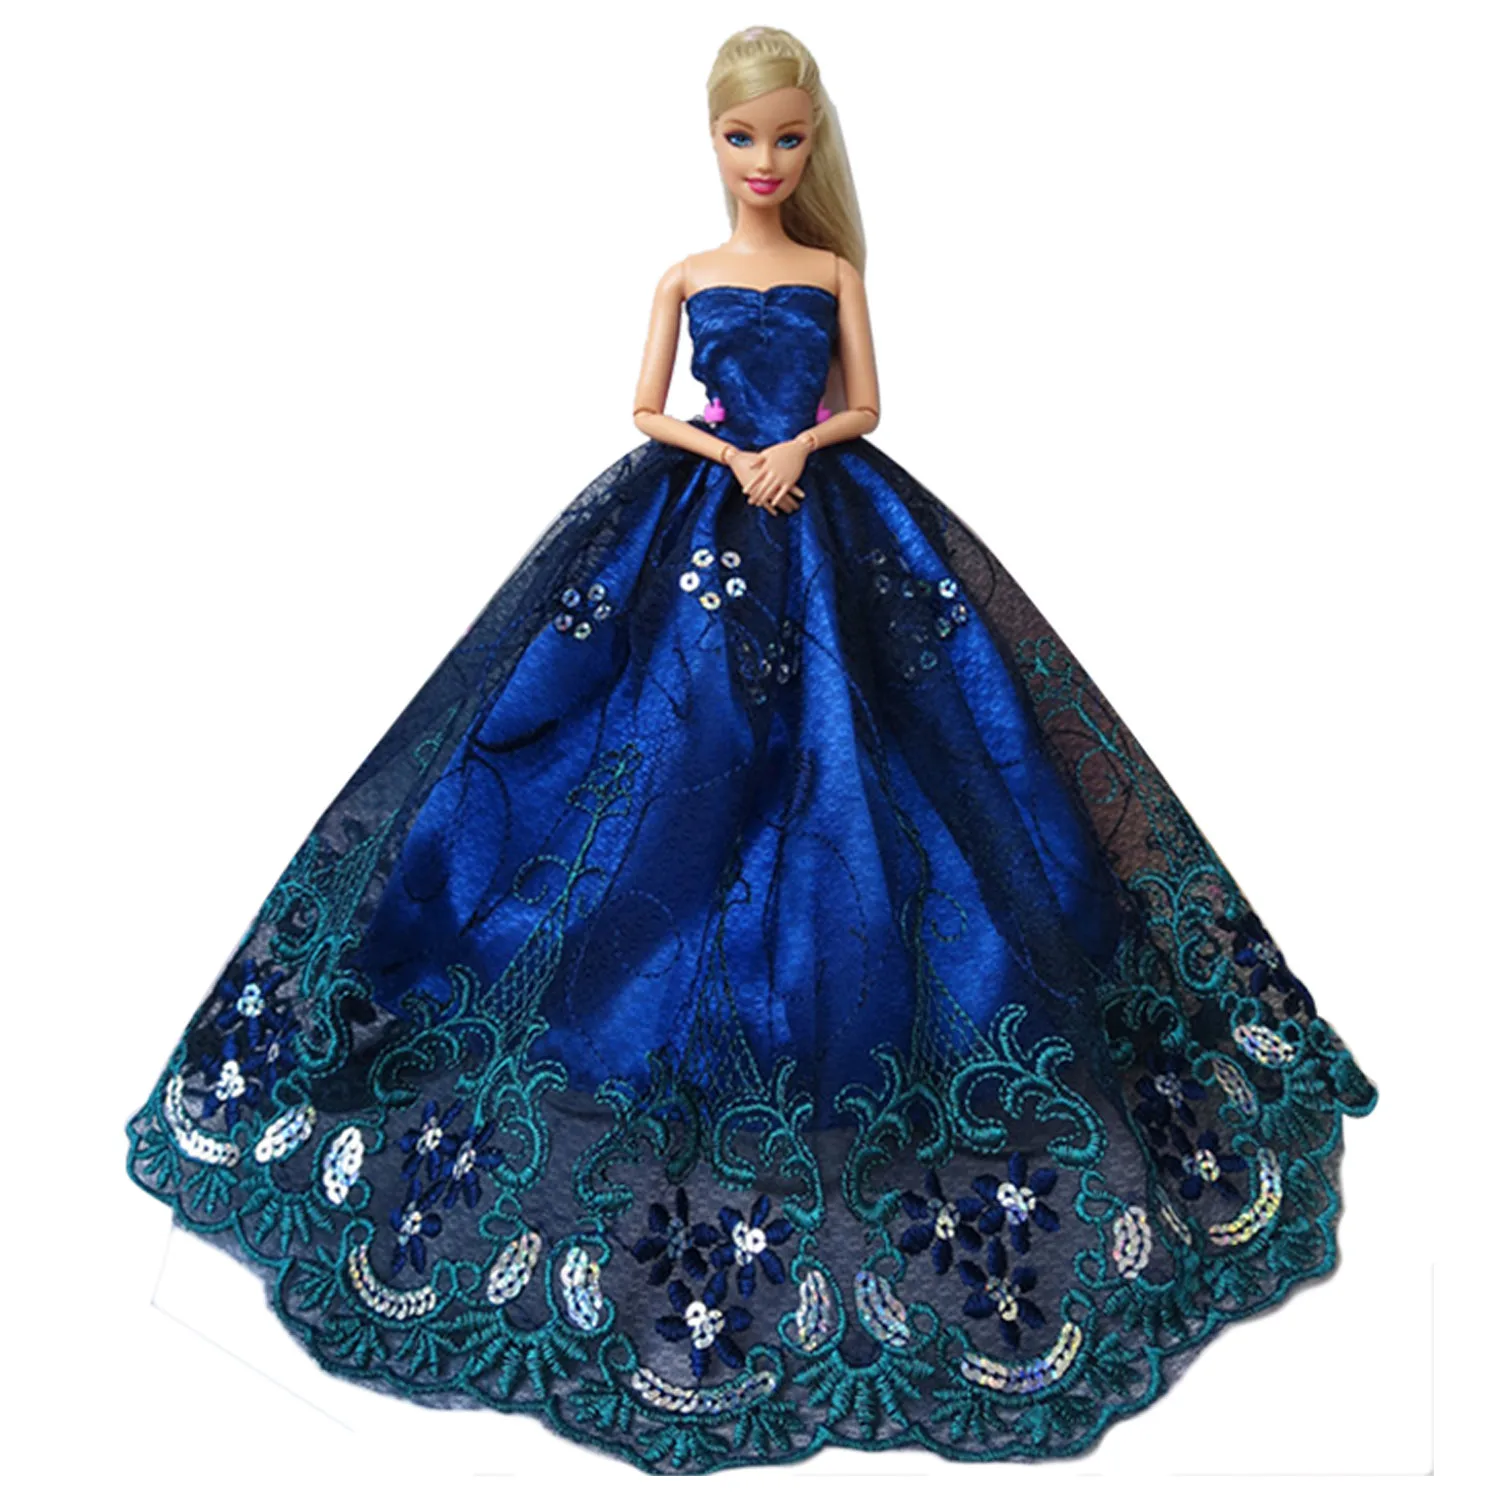 Besegad Mini Girl Doll Long Lace Gauze Dresses Evening Princess Gown Wedding Embroidered Clothes Accessories for Barbie Toy - Цвет: Blue